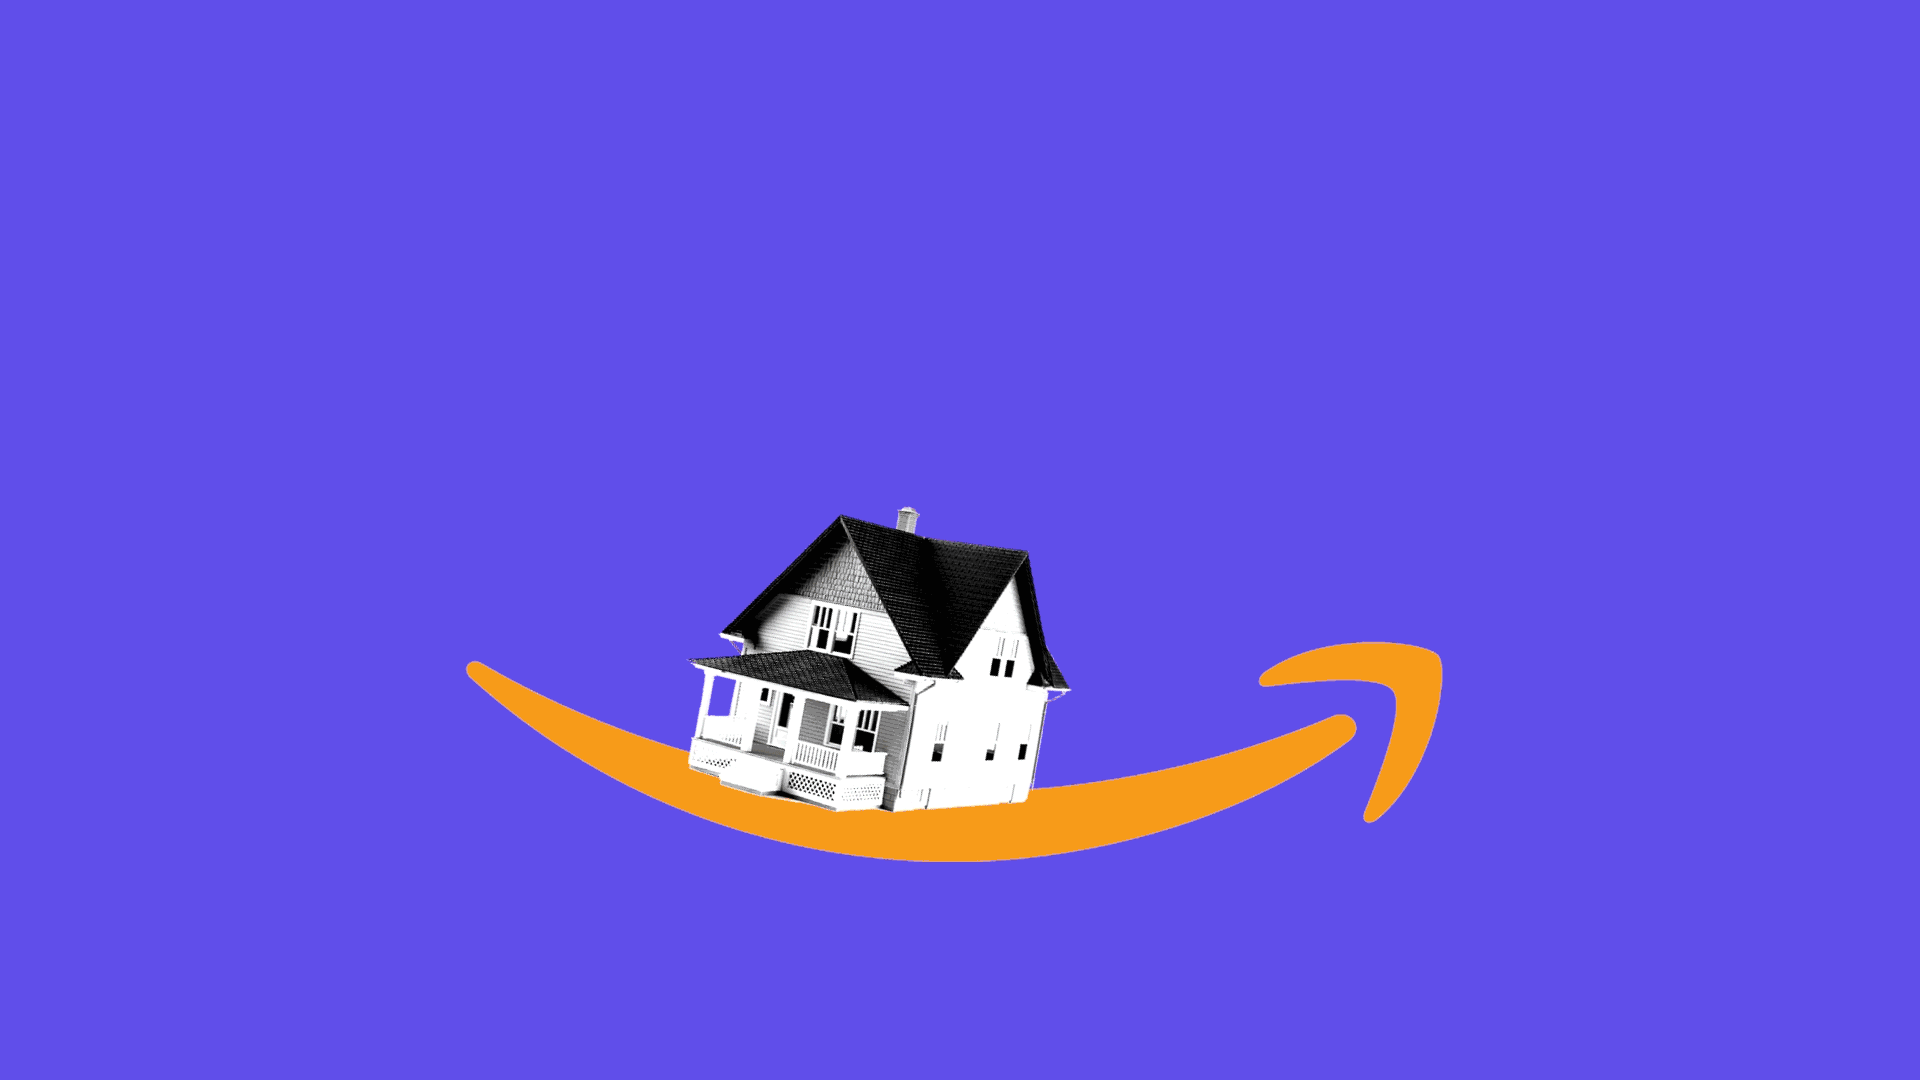 A house jumps off the Amazon logo